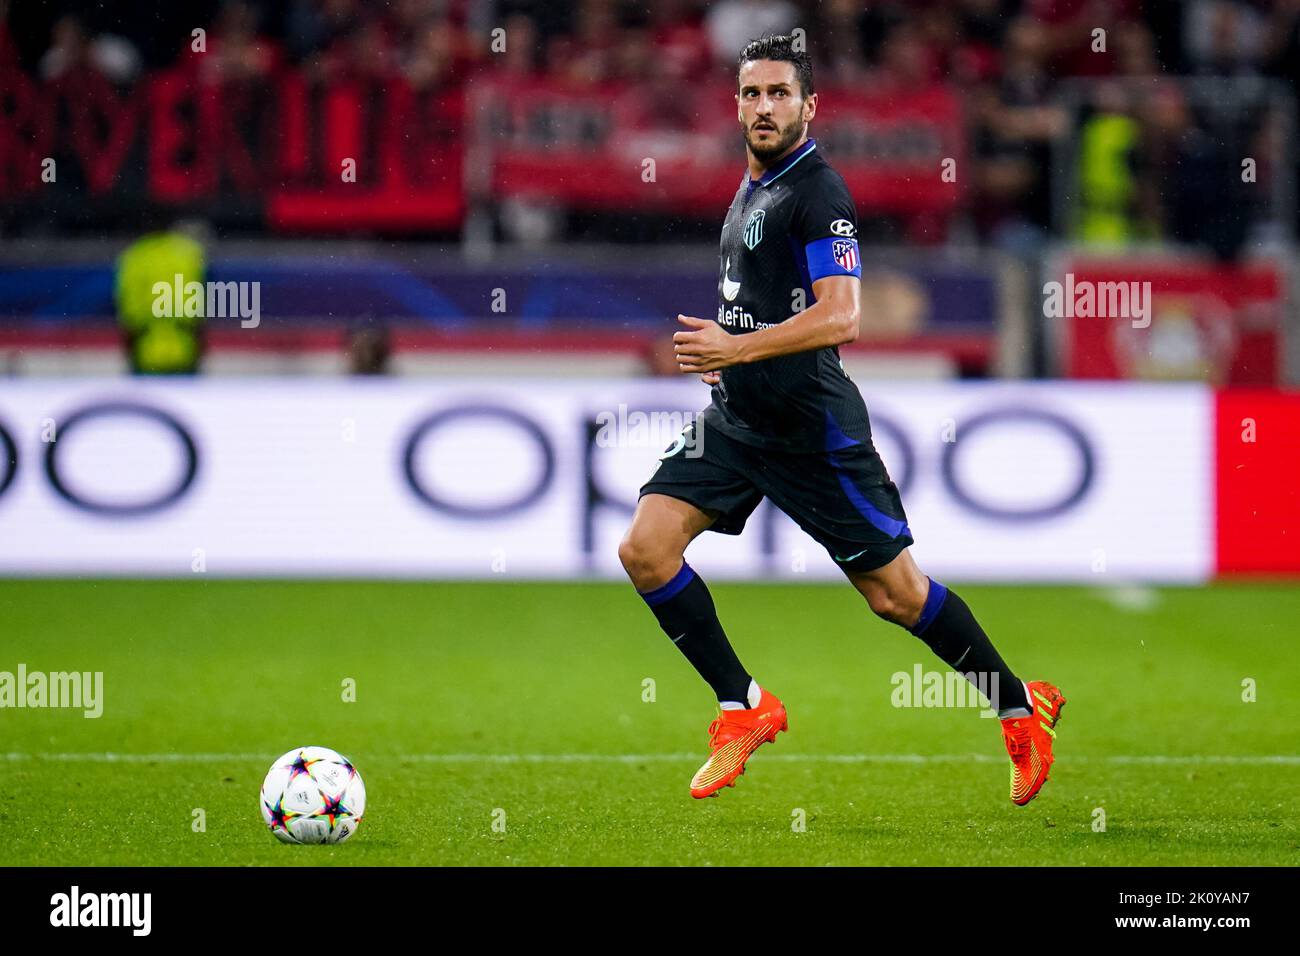 LEVERKUSEN, GERMANY - SEPTEMBER 13: Koke of Atletico Madrid runs with the ball during the UEFA Champions League - Group B match between Bayer Leverkusen and Atletico Madrid at the BayArena on September 13, 2022 in Leverkusen, Germany (Photo by Rene Nijhuis/Orange Pictures) Stock Photo